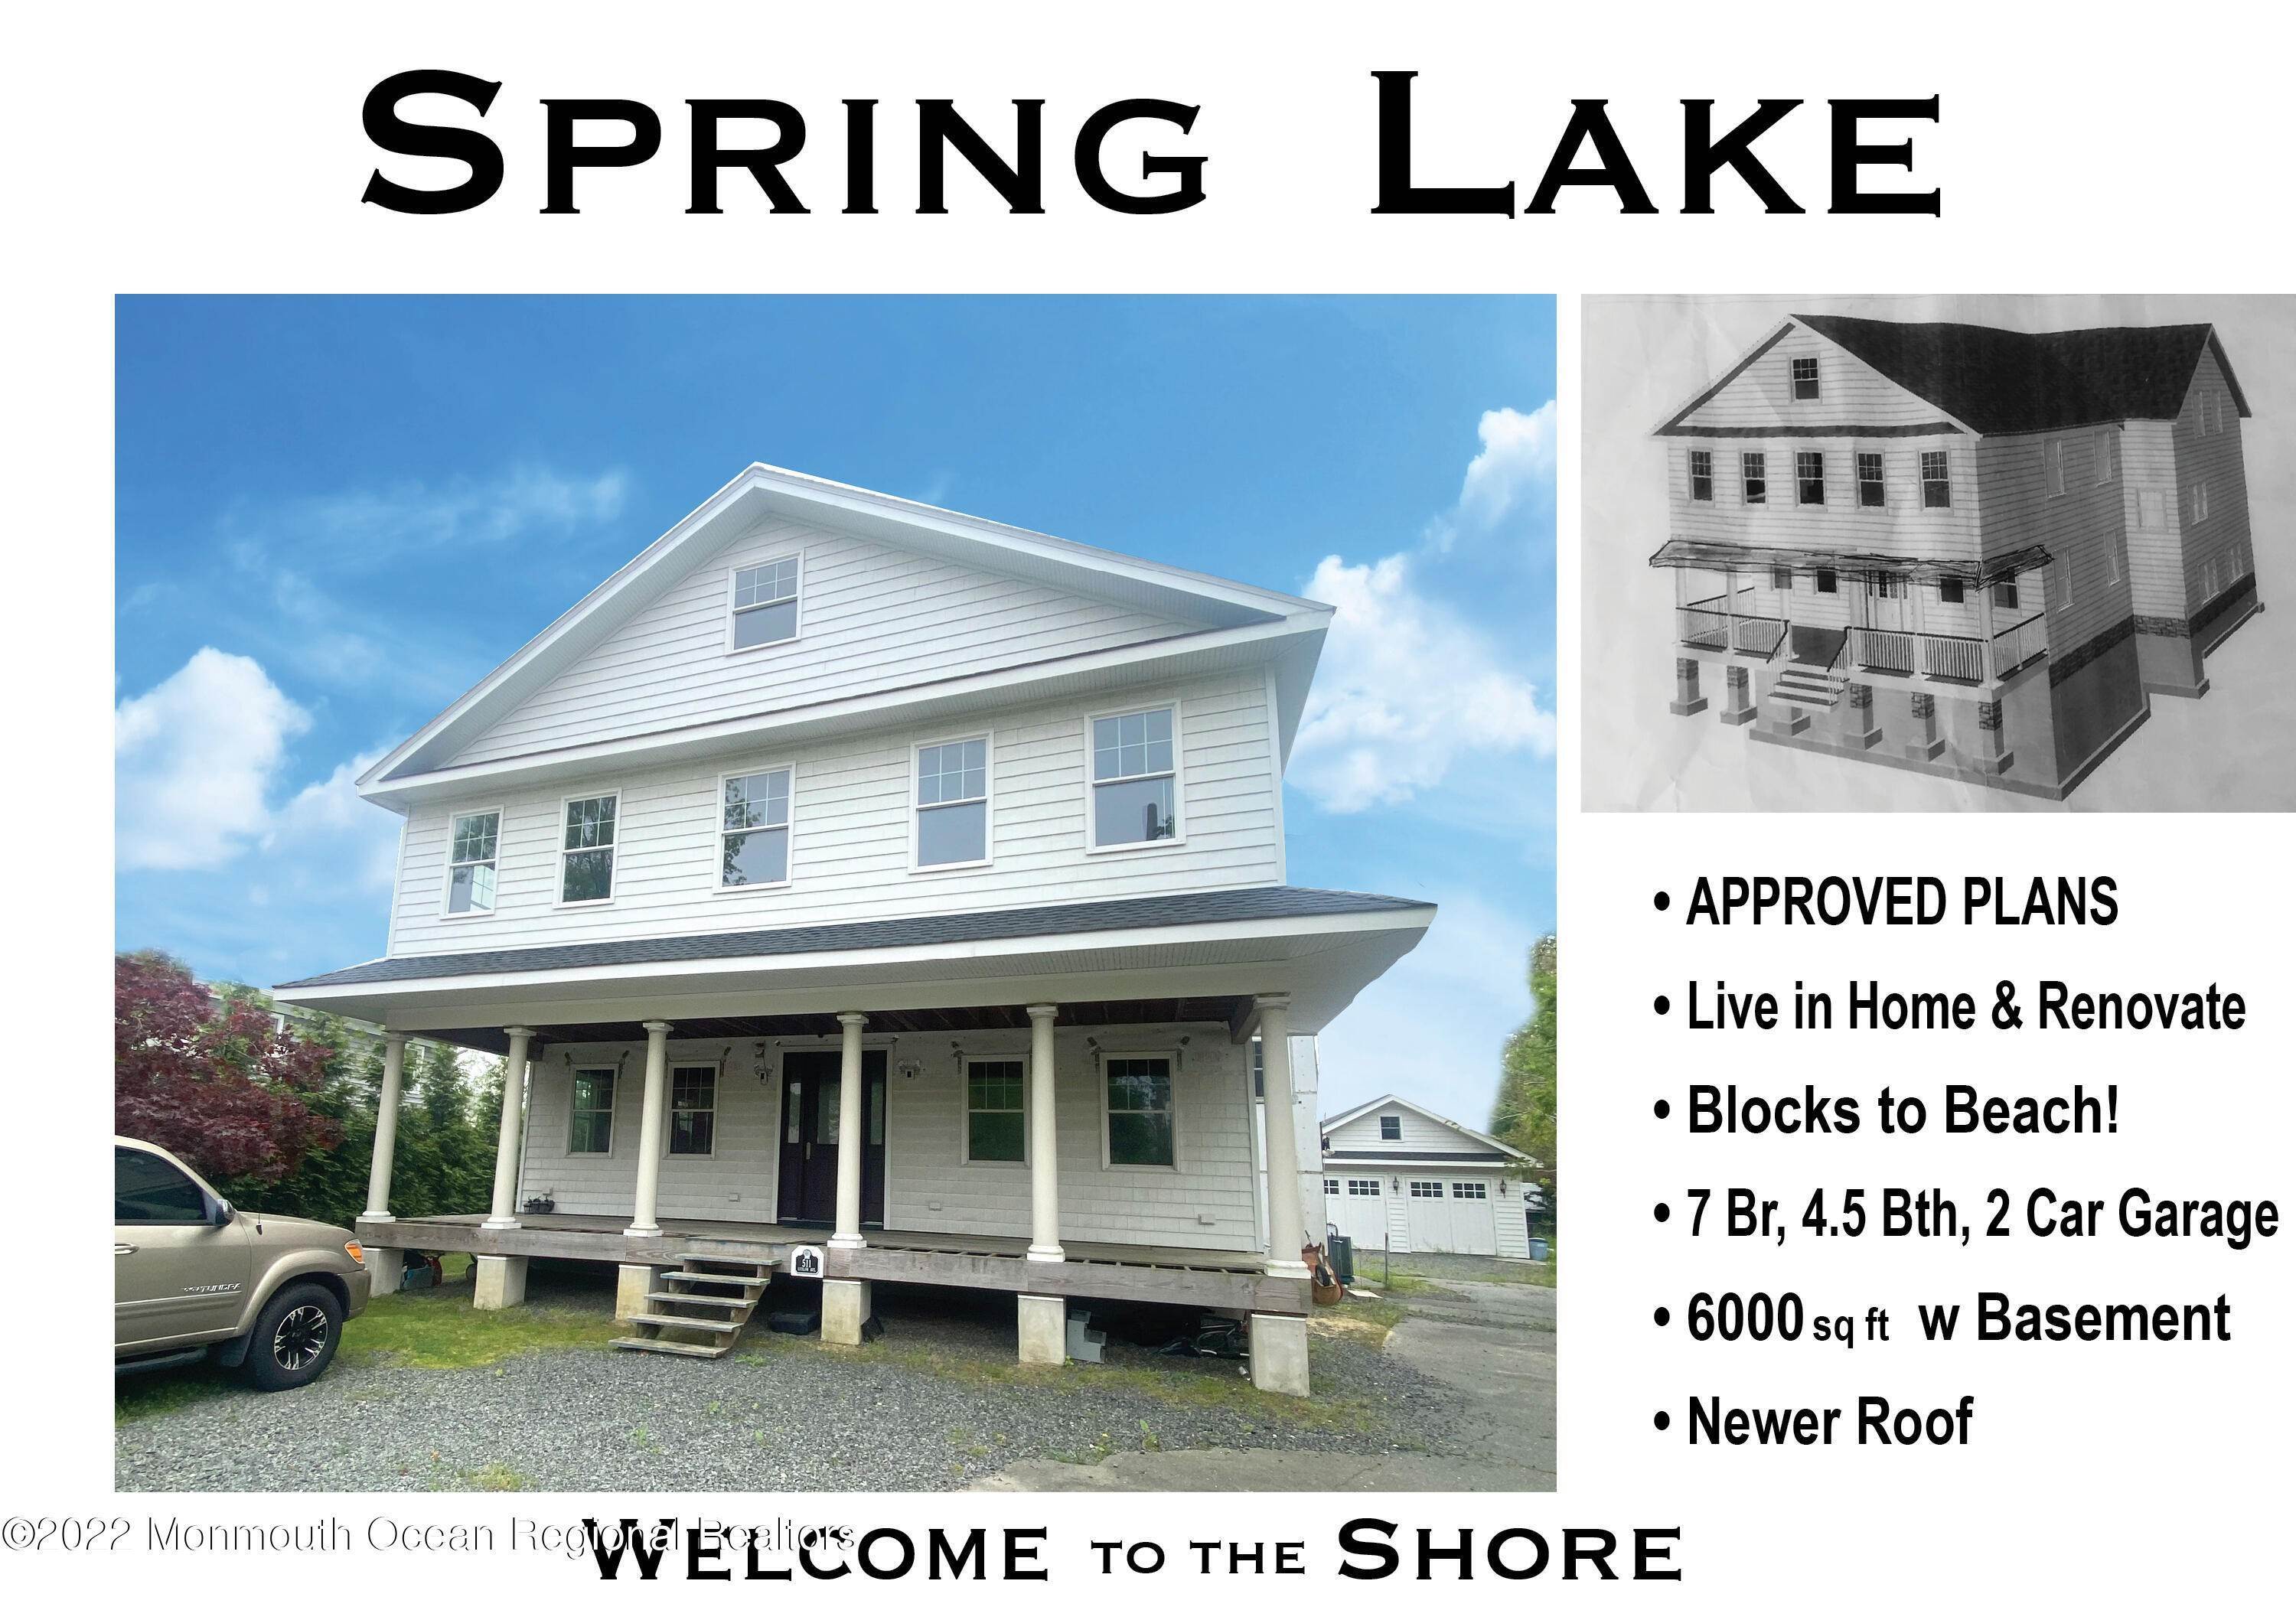 Single Family Homes for Sale at 511 Ludlow Avenue Spring Lake, New Jersey 07762 United States